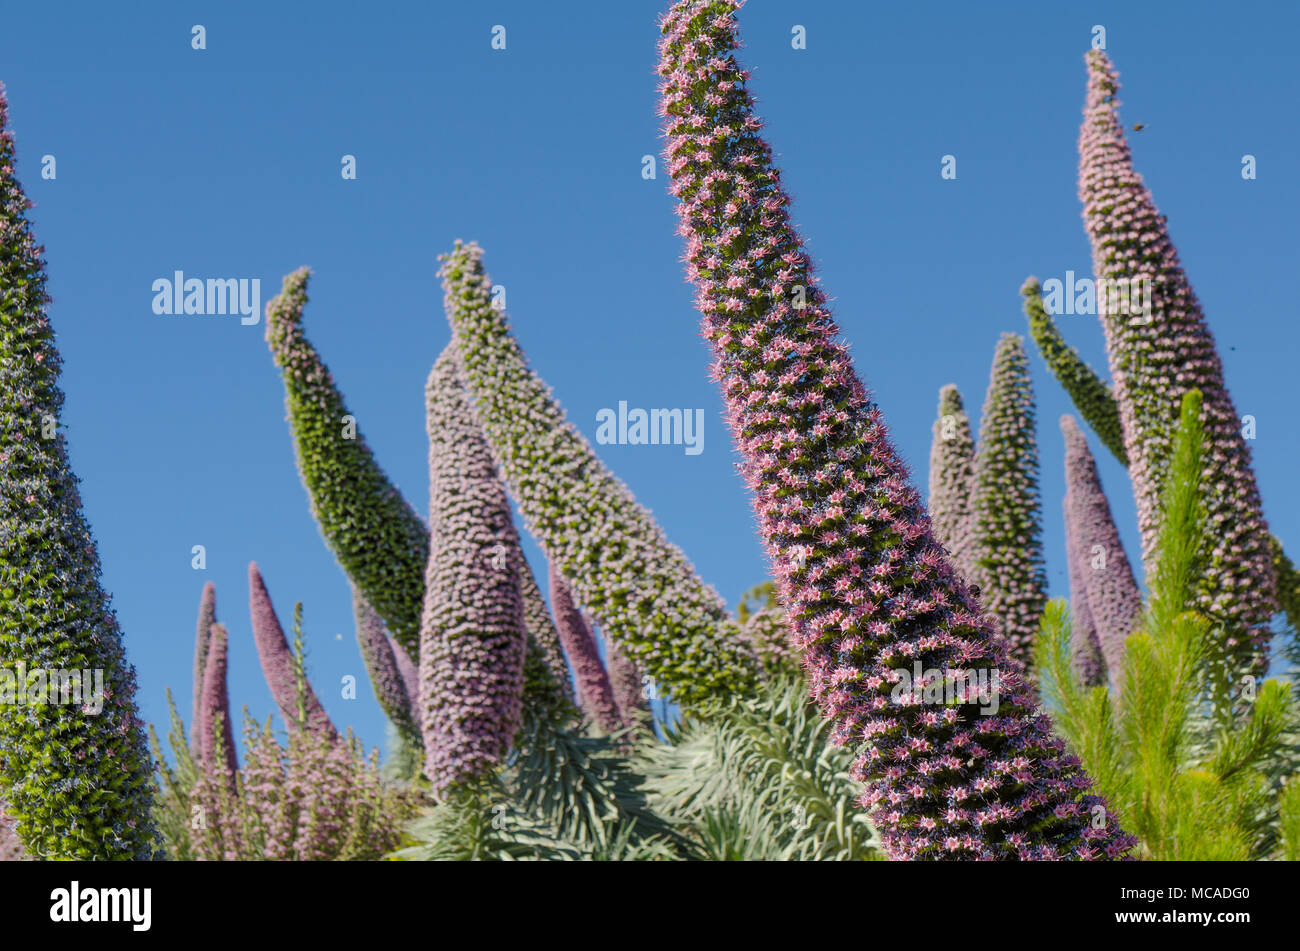 Echium wildpretii ssp trichosiphon plant also known as tower of jewels, pink bugloss or La Palma bugloss. The species is endemic to the island of La P Stock Photo